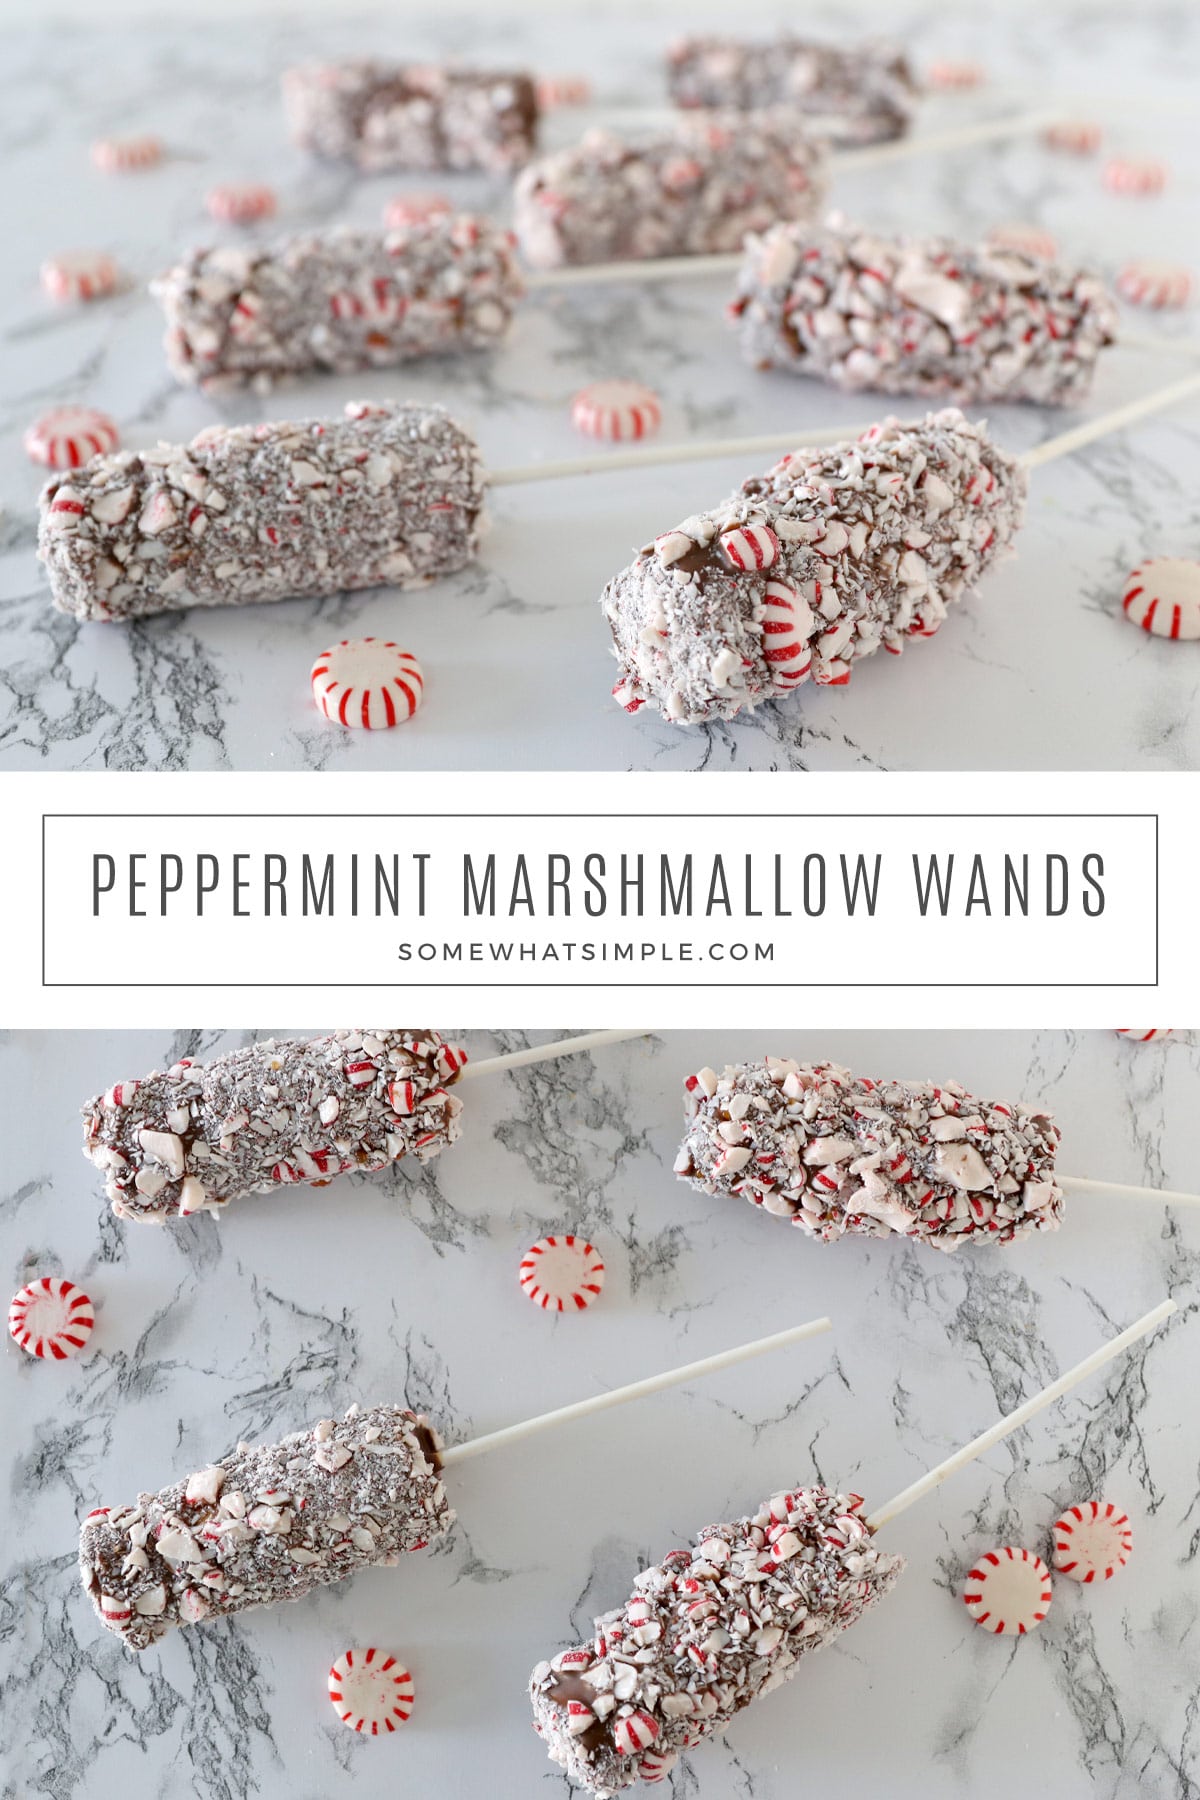 Peppermint Marshmallow Pops are a delicious treat the entire family can make and enjoy! With caramel, chocolate, and crushed peppermint candies, this easy recipe is perfect for the holidays! via @somewhatsimple